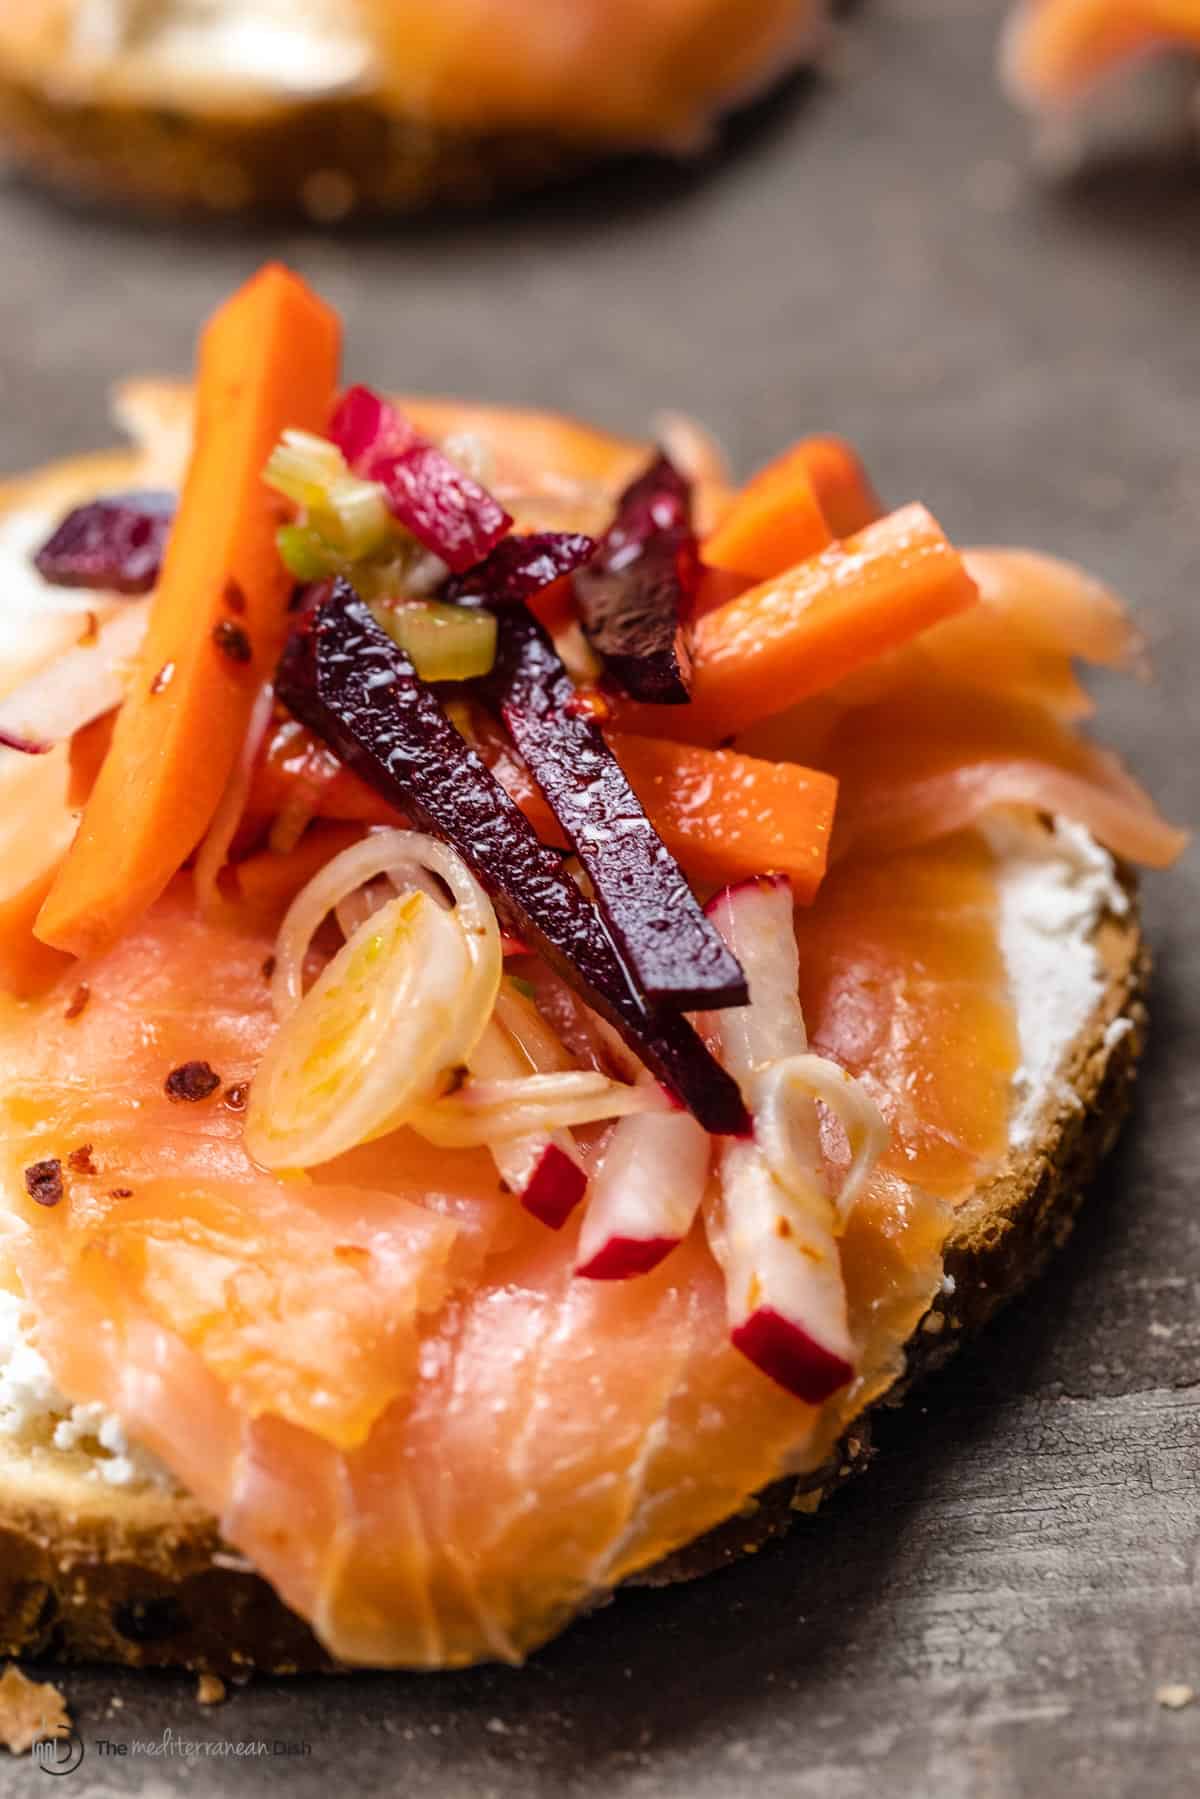 smoked salmon over toast with feta and root vegetables like carrots and beets